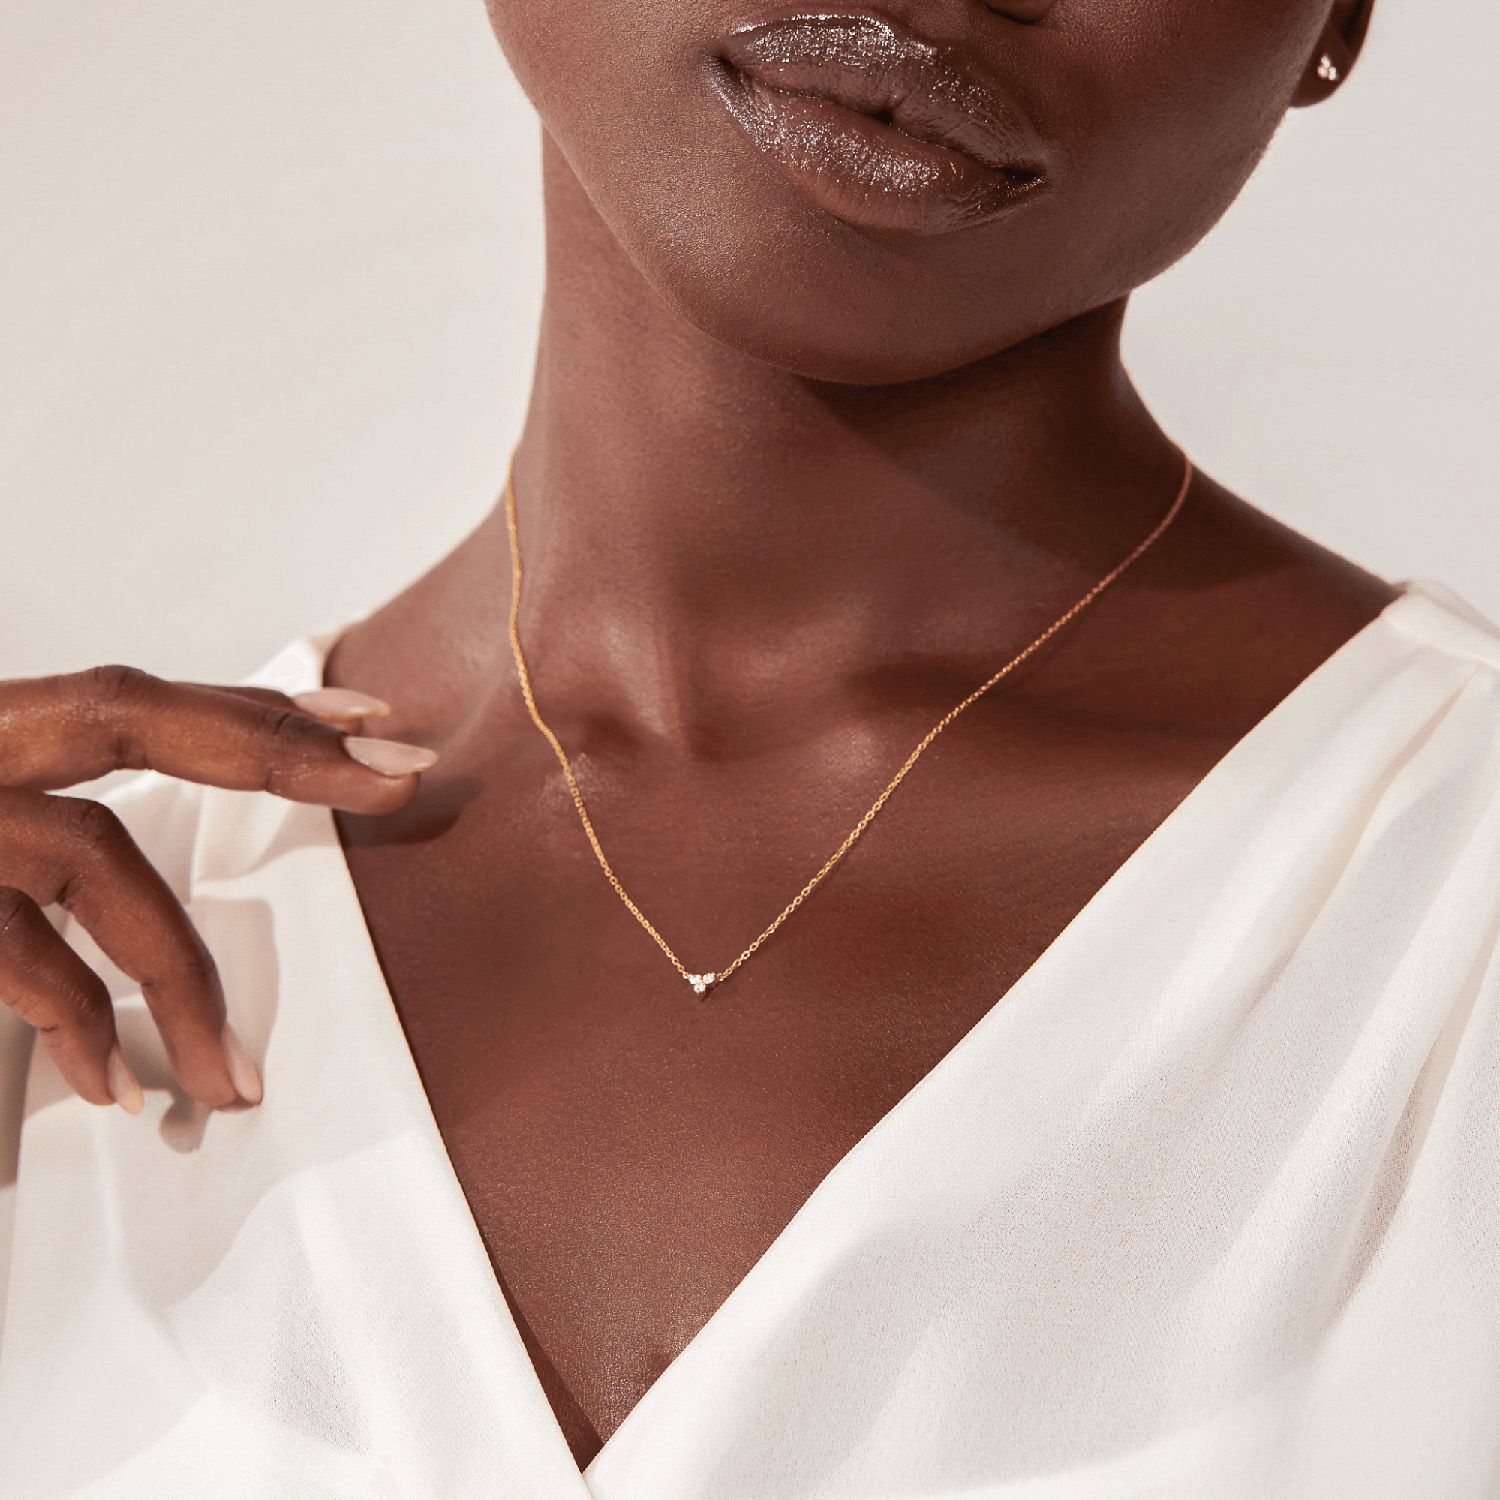 Top 8 Jewelry Trends: Stay Ahead of the Game with These Must-Have Pieces